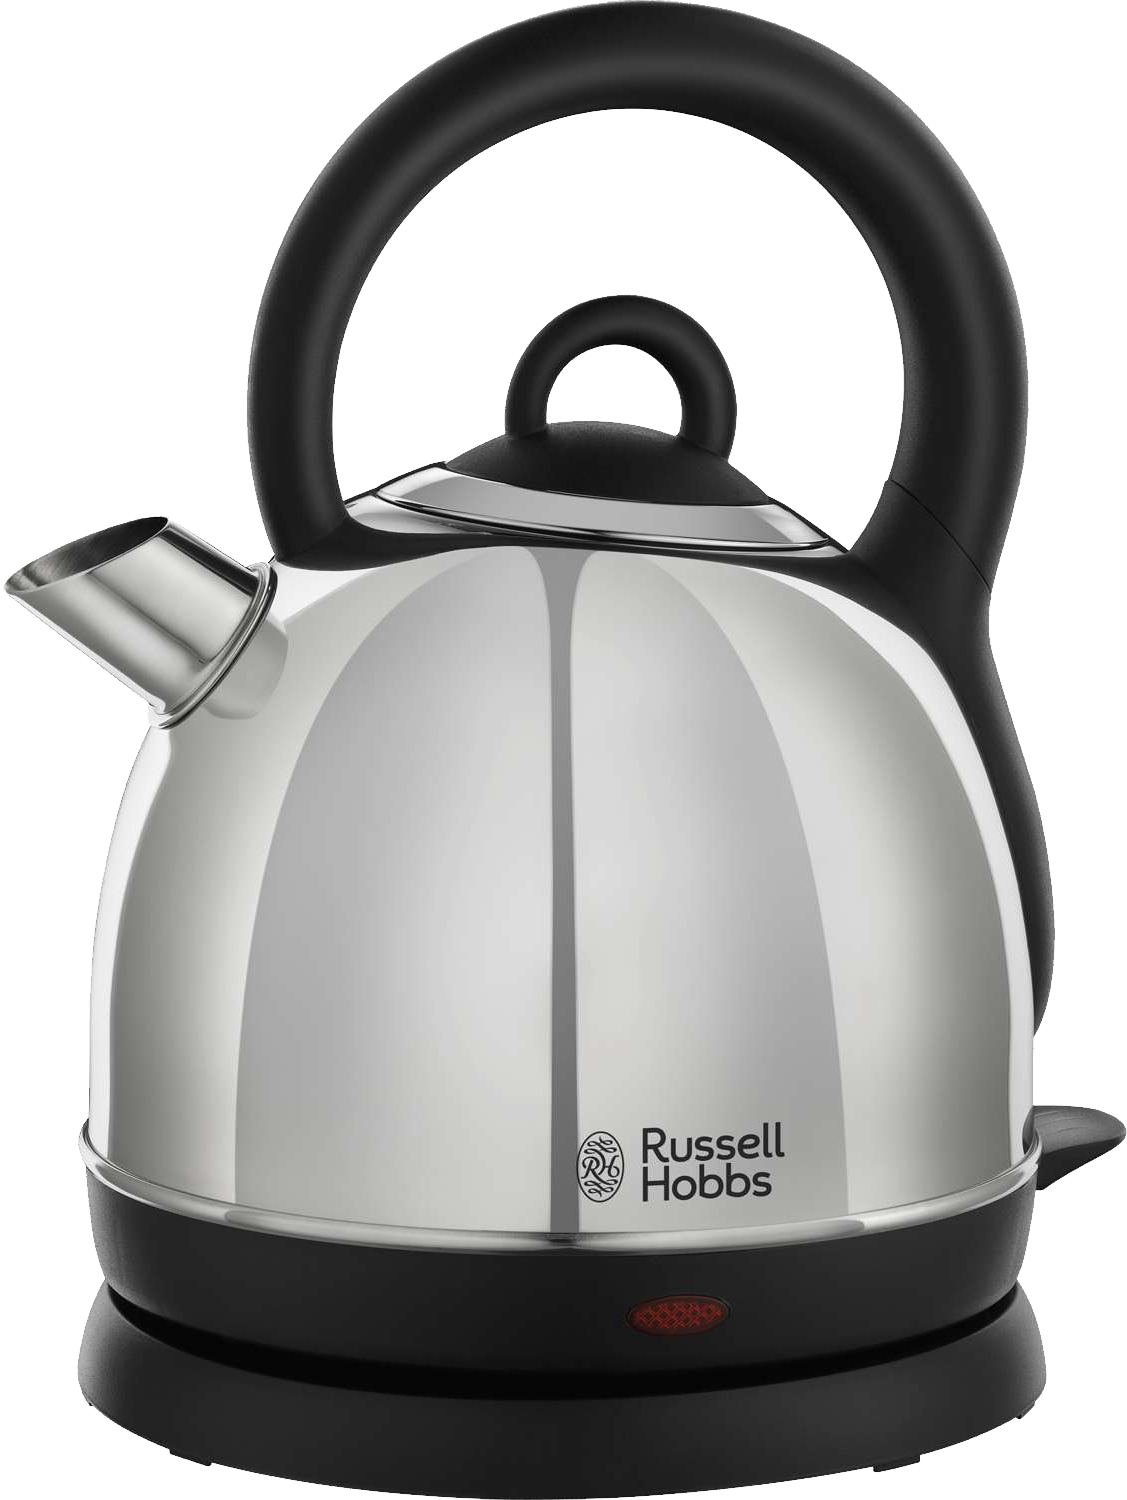 Kettle Pic Electric Free Transparent Image HQ PNG Image